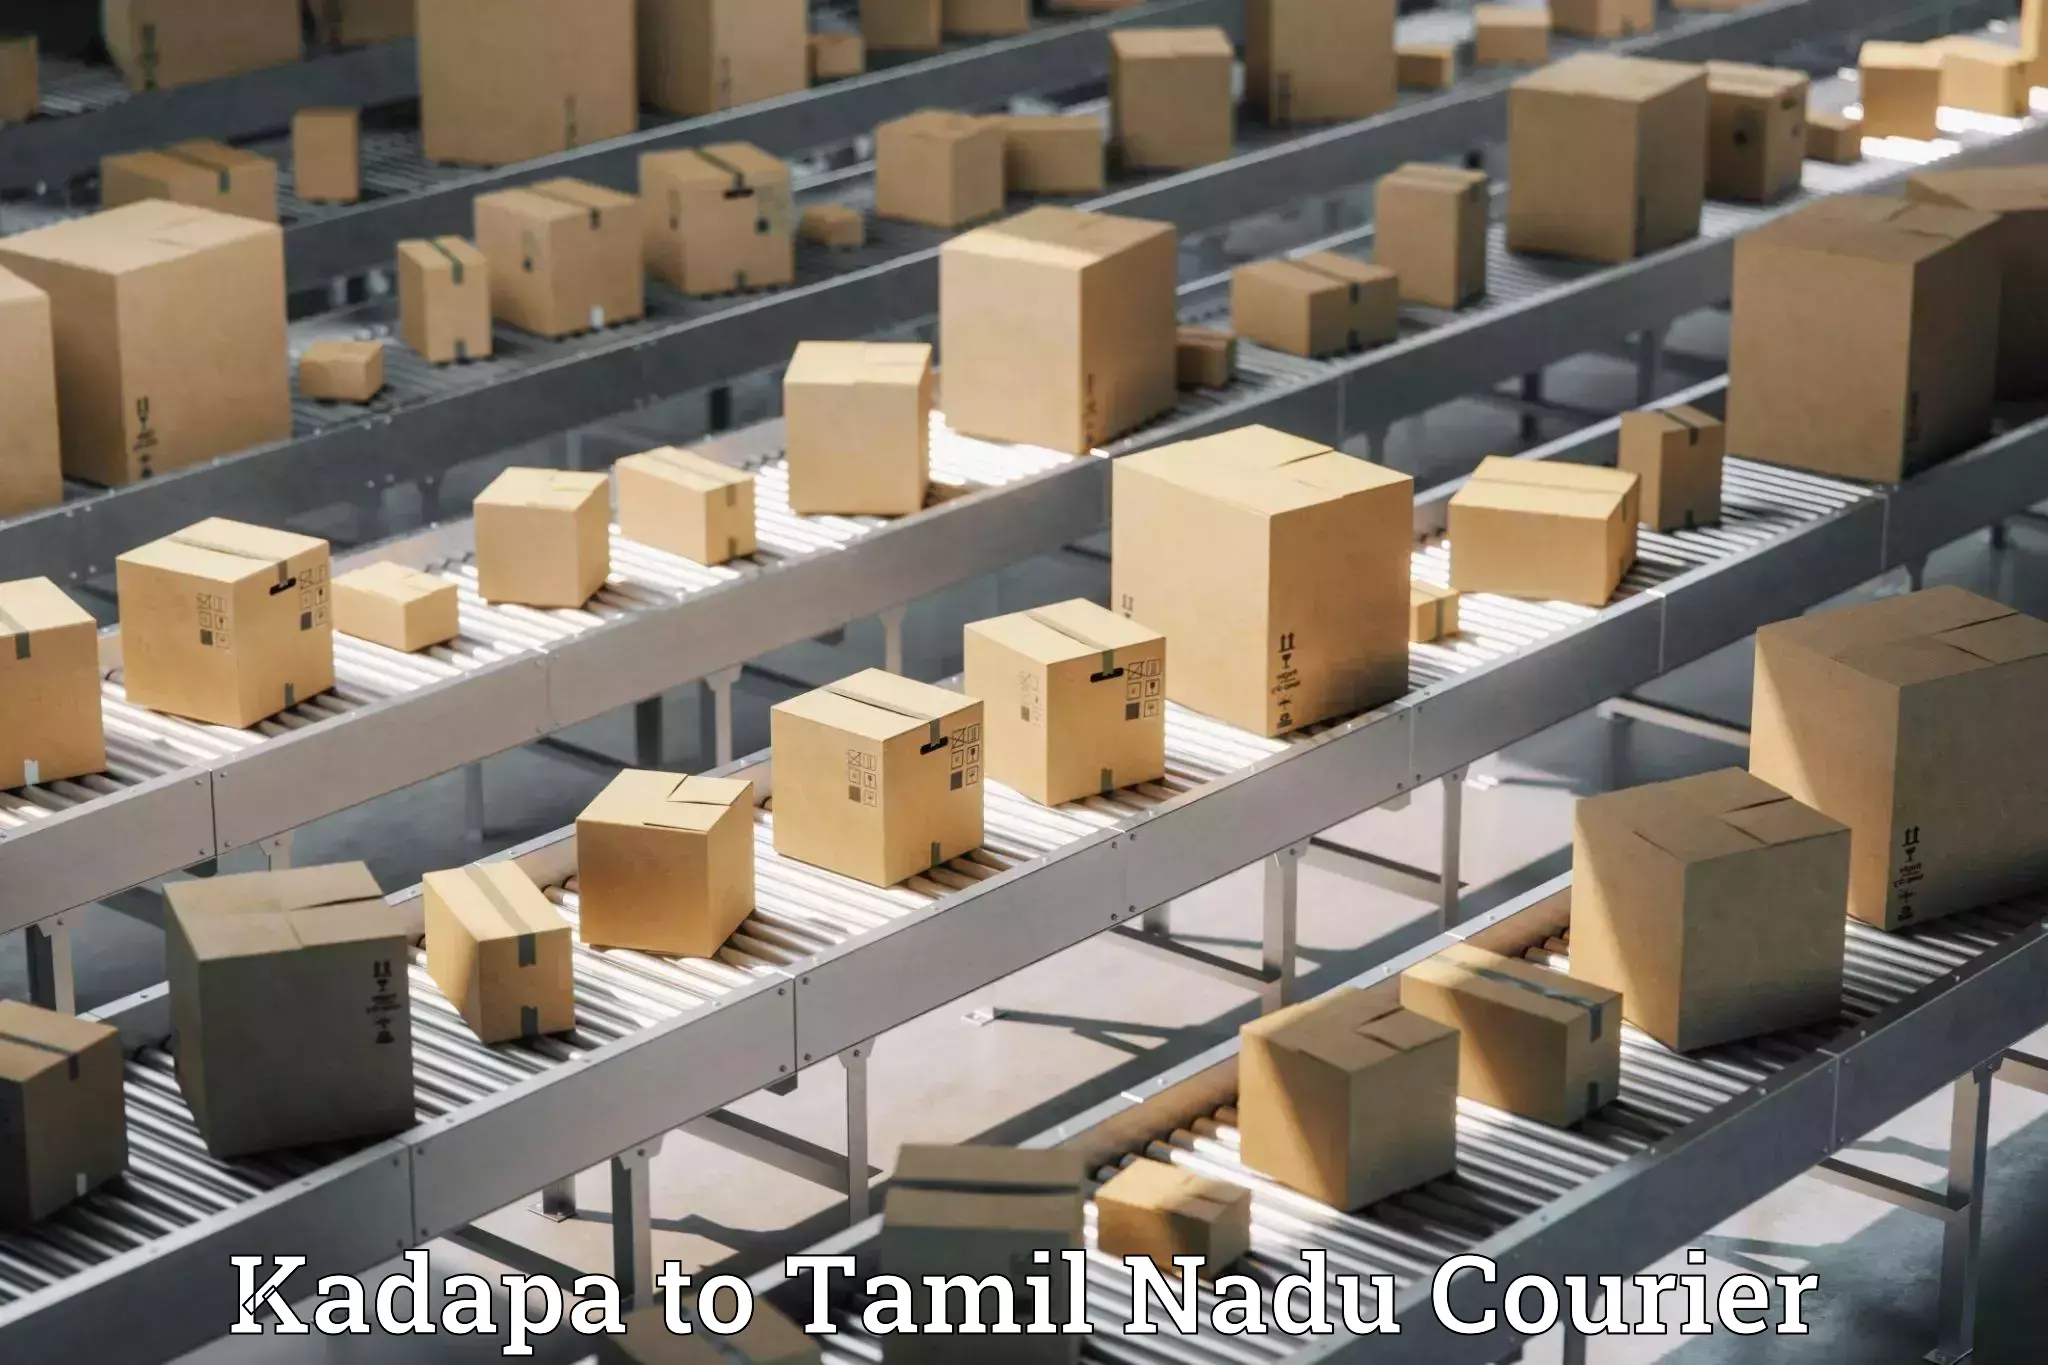 Reliable delivery network Kadapa to Ambattur